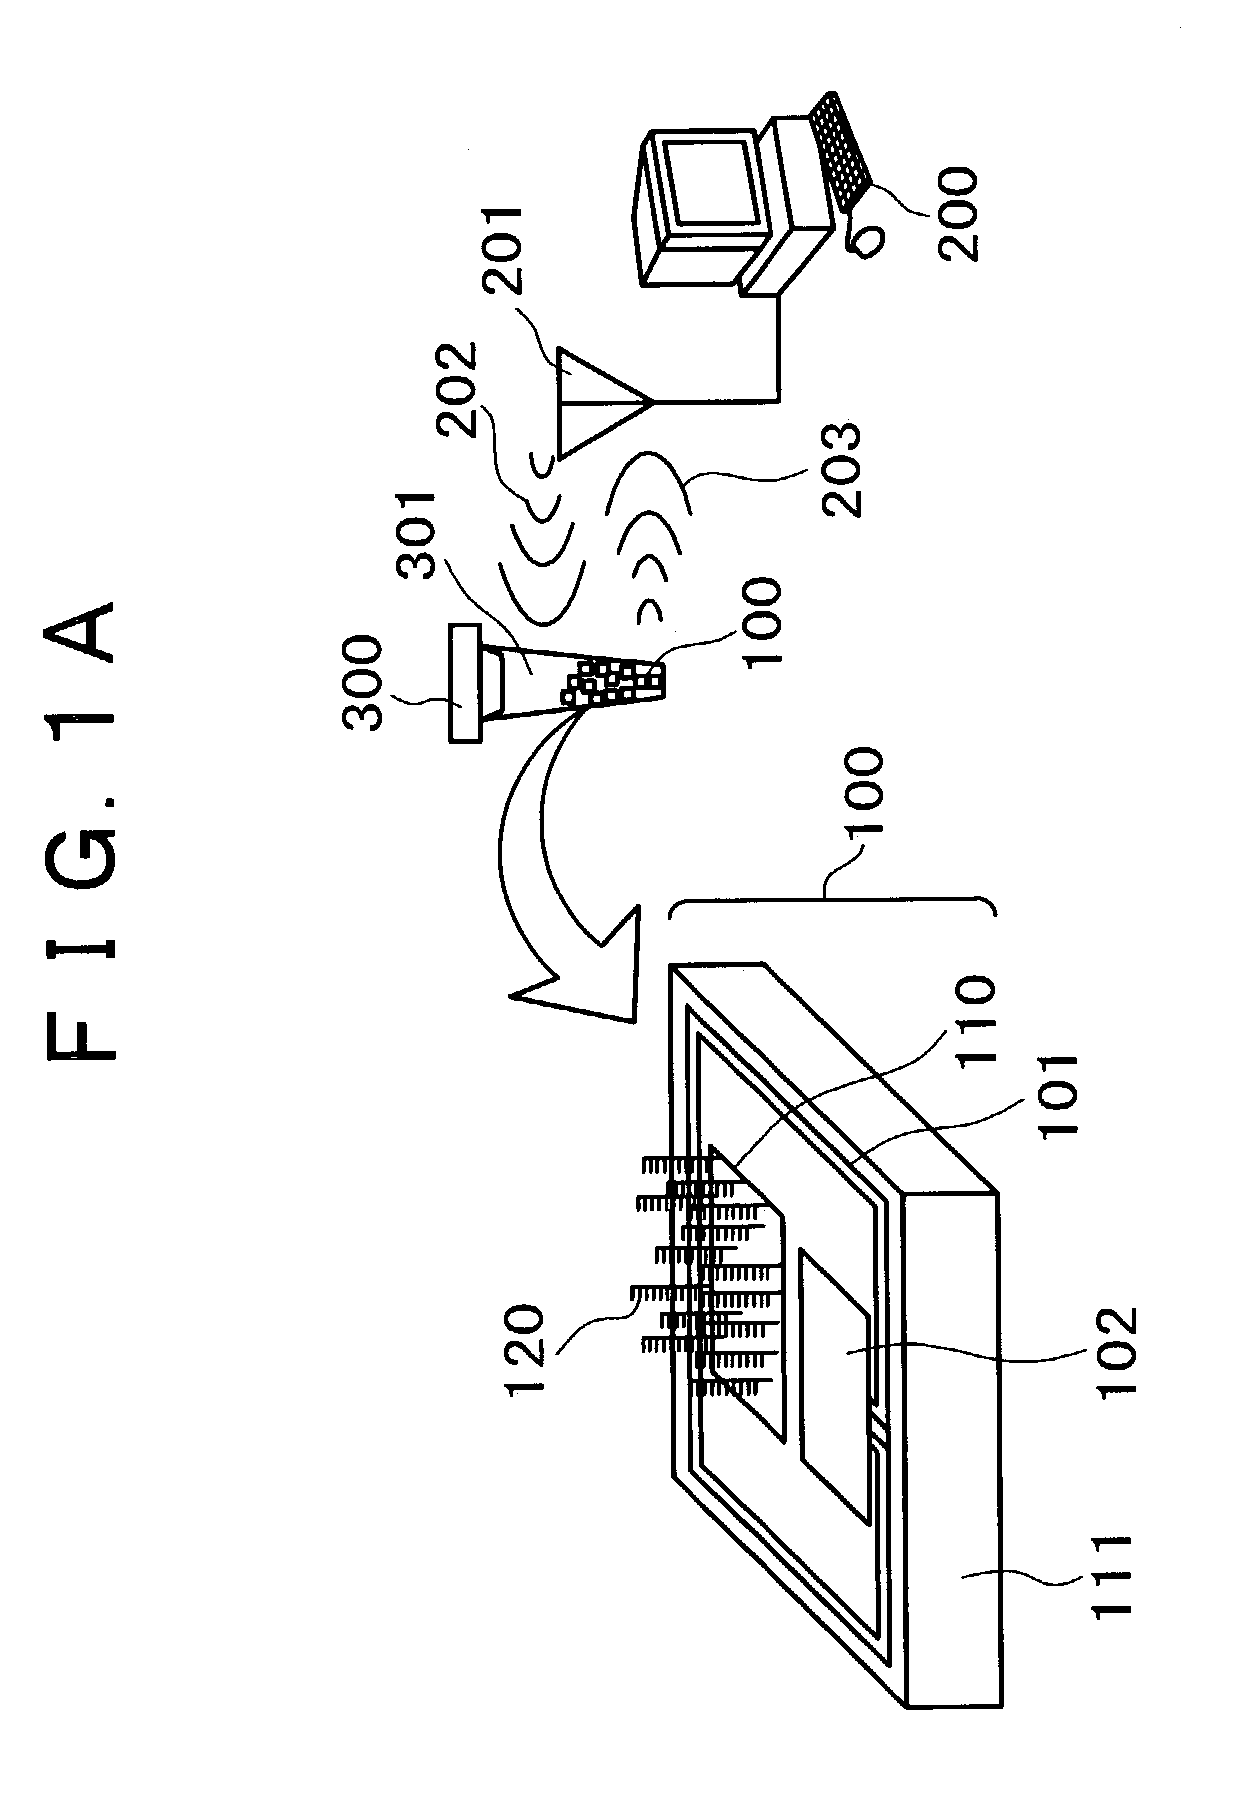 System and method for detecting biological and chemical material